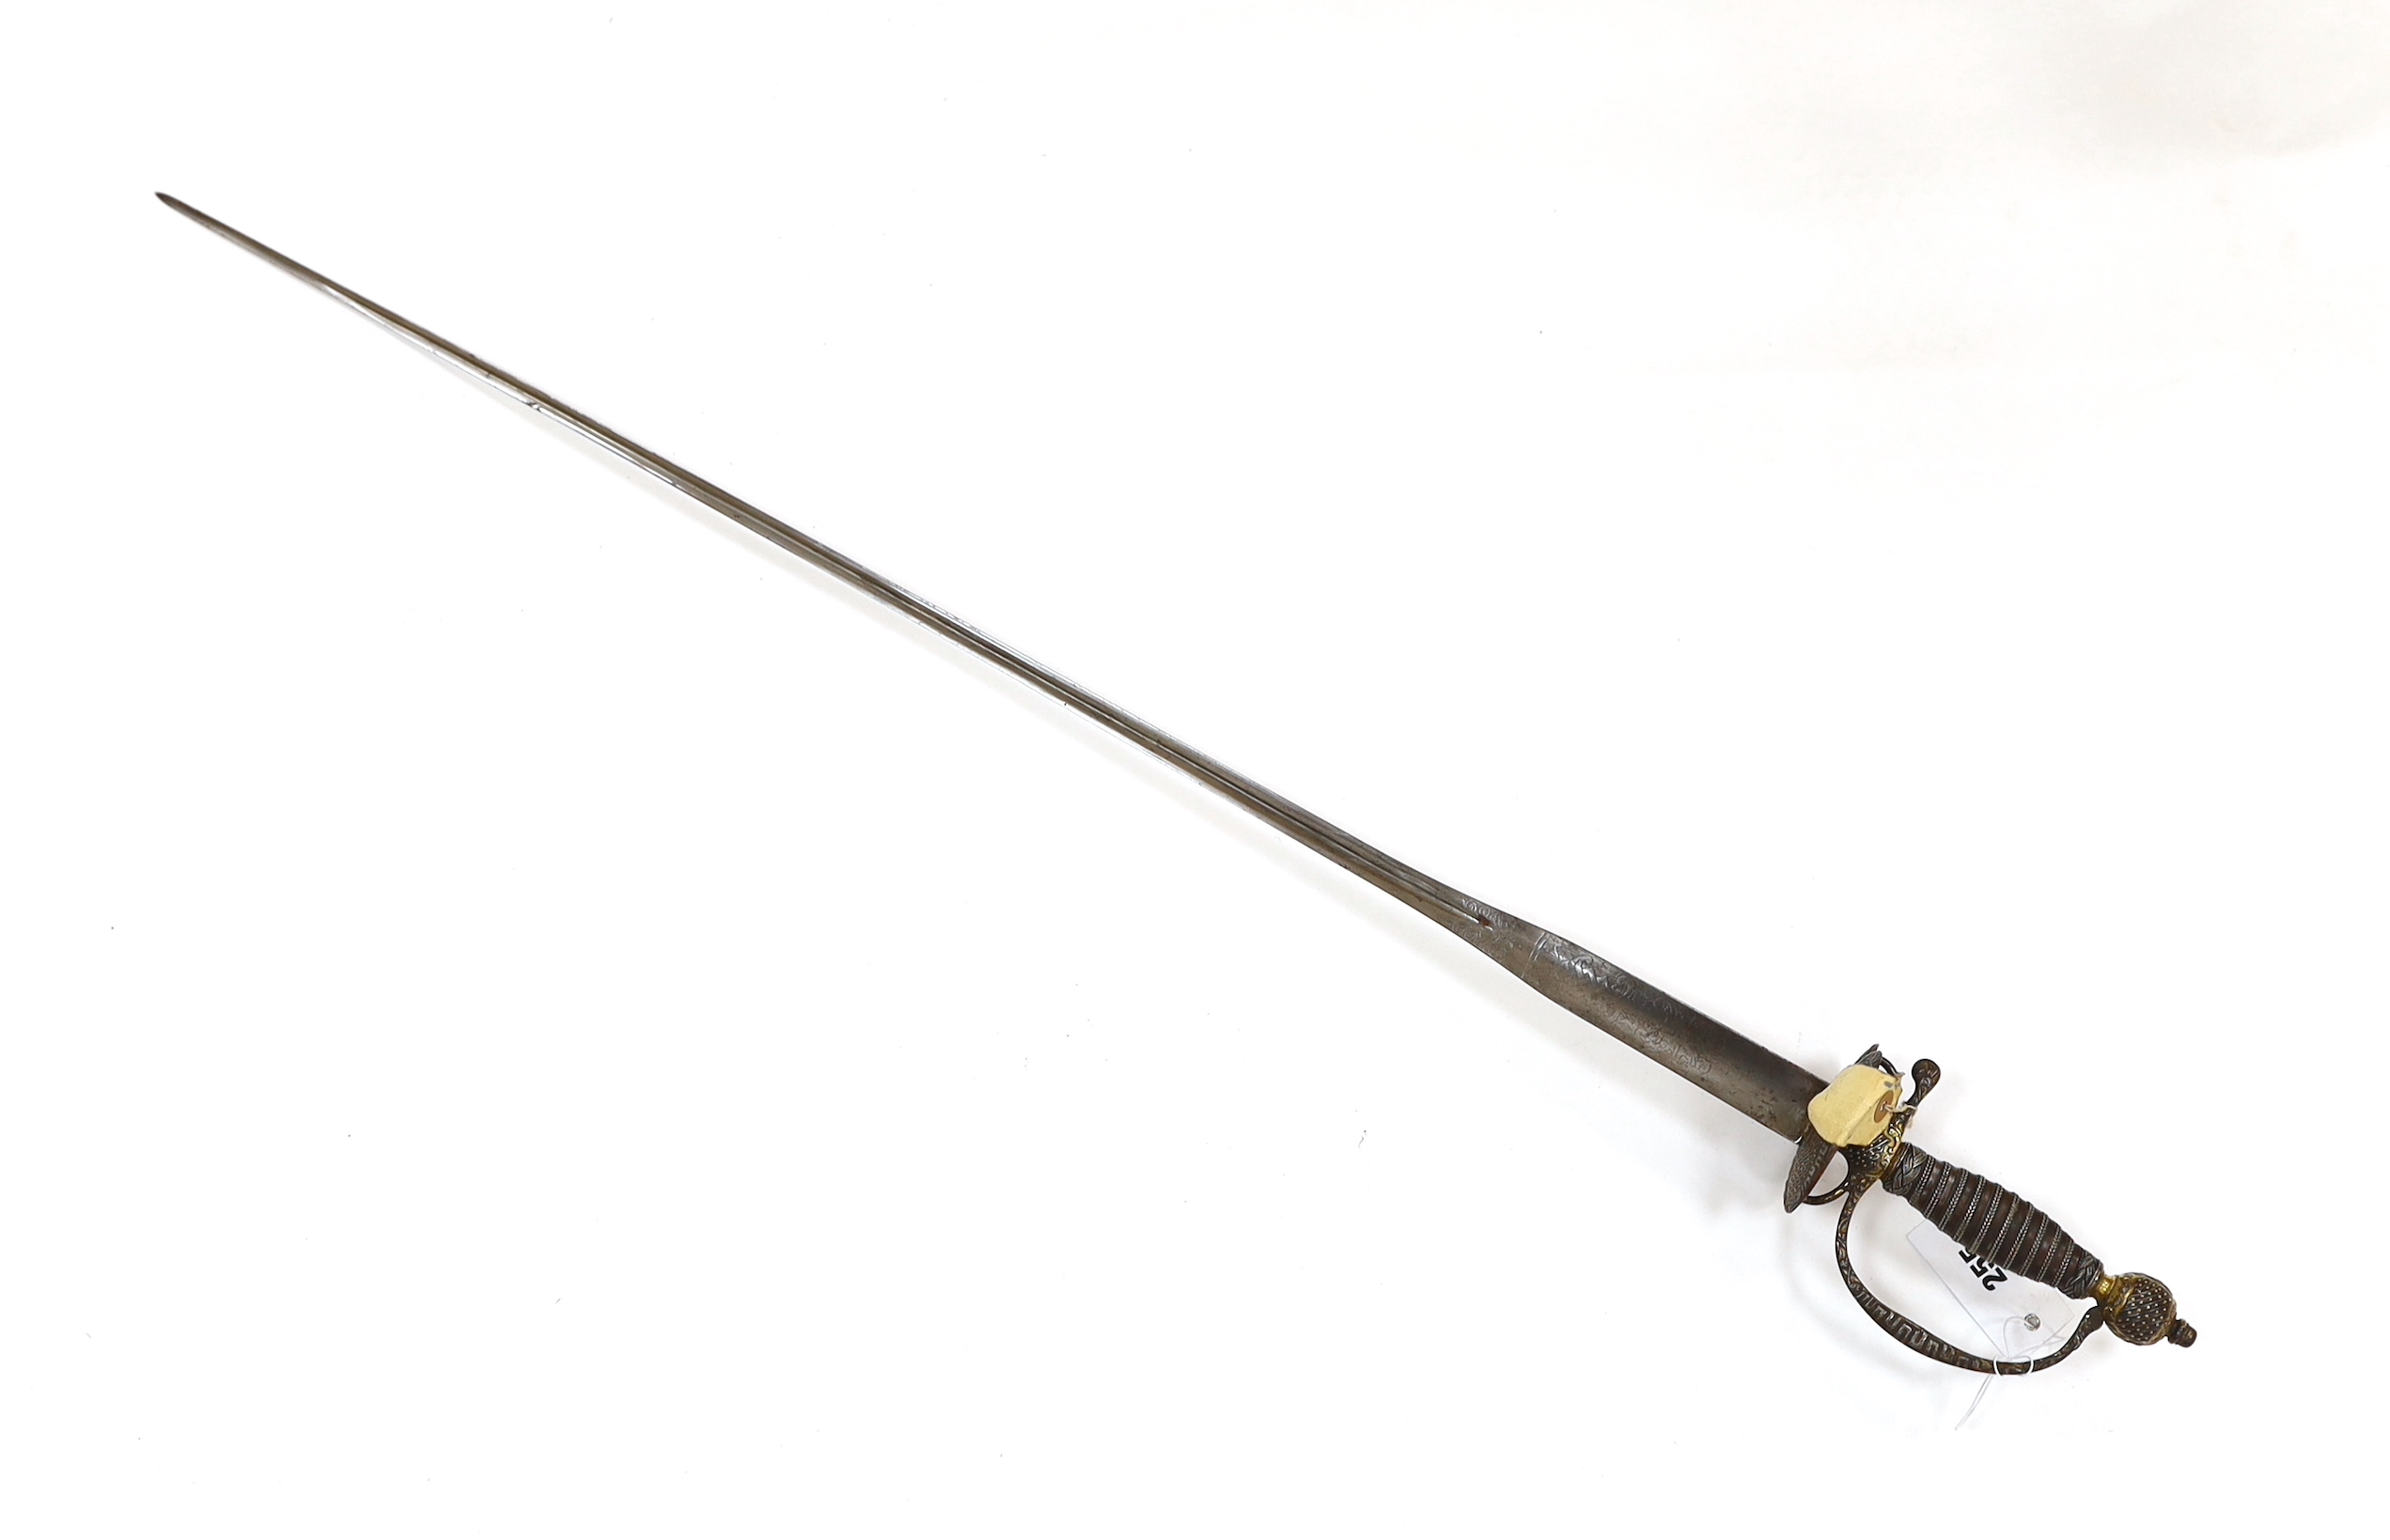 A French iron hilted small sword, hilt with flutes and tiny gold dots, the knuckle guard with key decoration, iron tape and silver wire bound grip, colichemarde blade with etched strapwork decoration, c.1770, blade 83cm